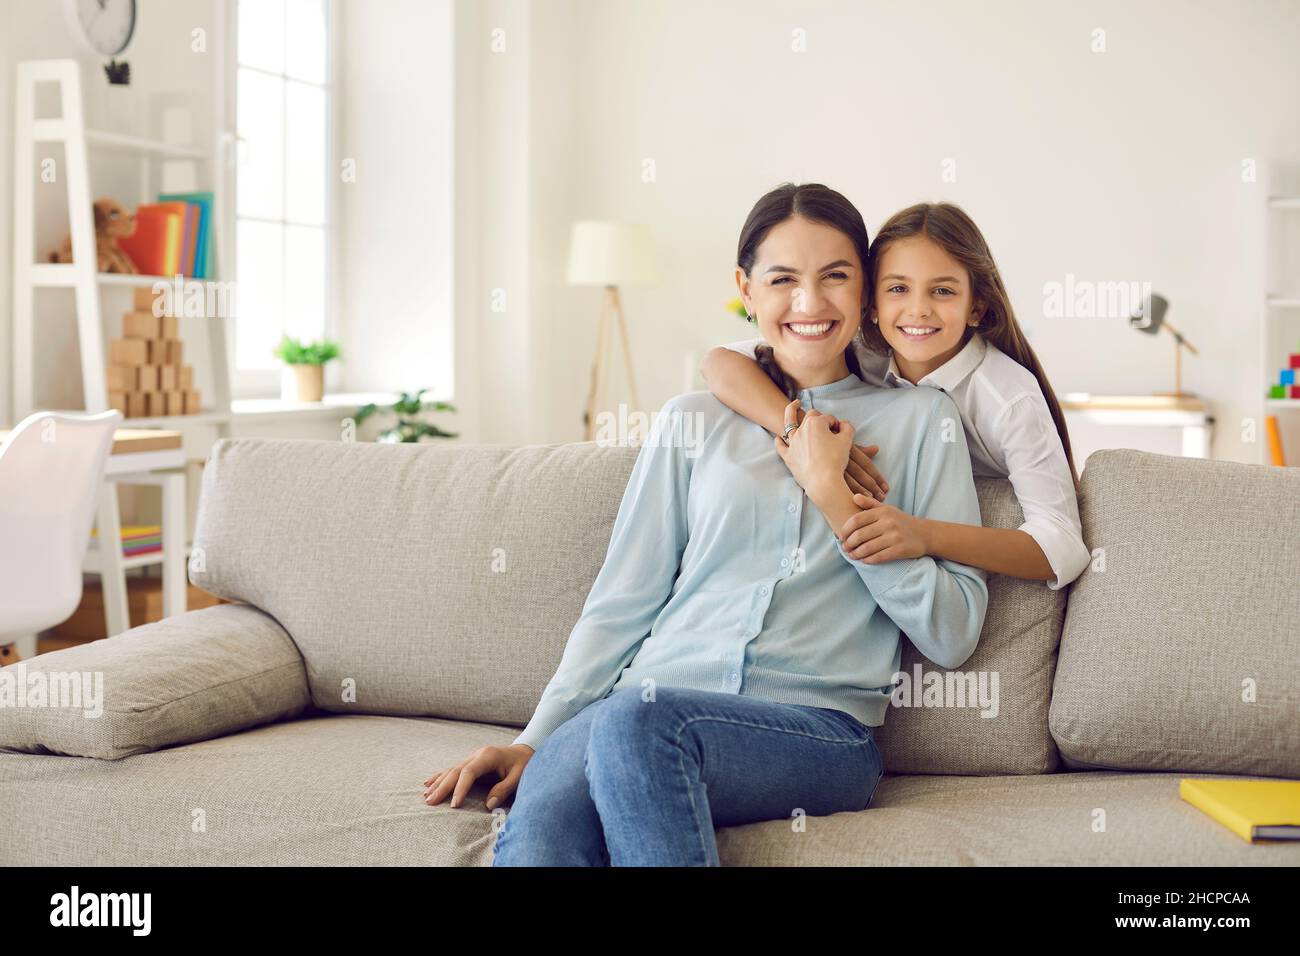 Portrait of happy young mom and teen daughter hug Stock Photo